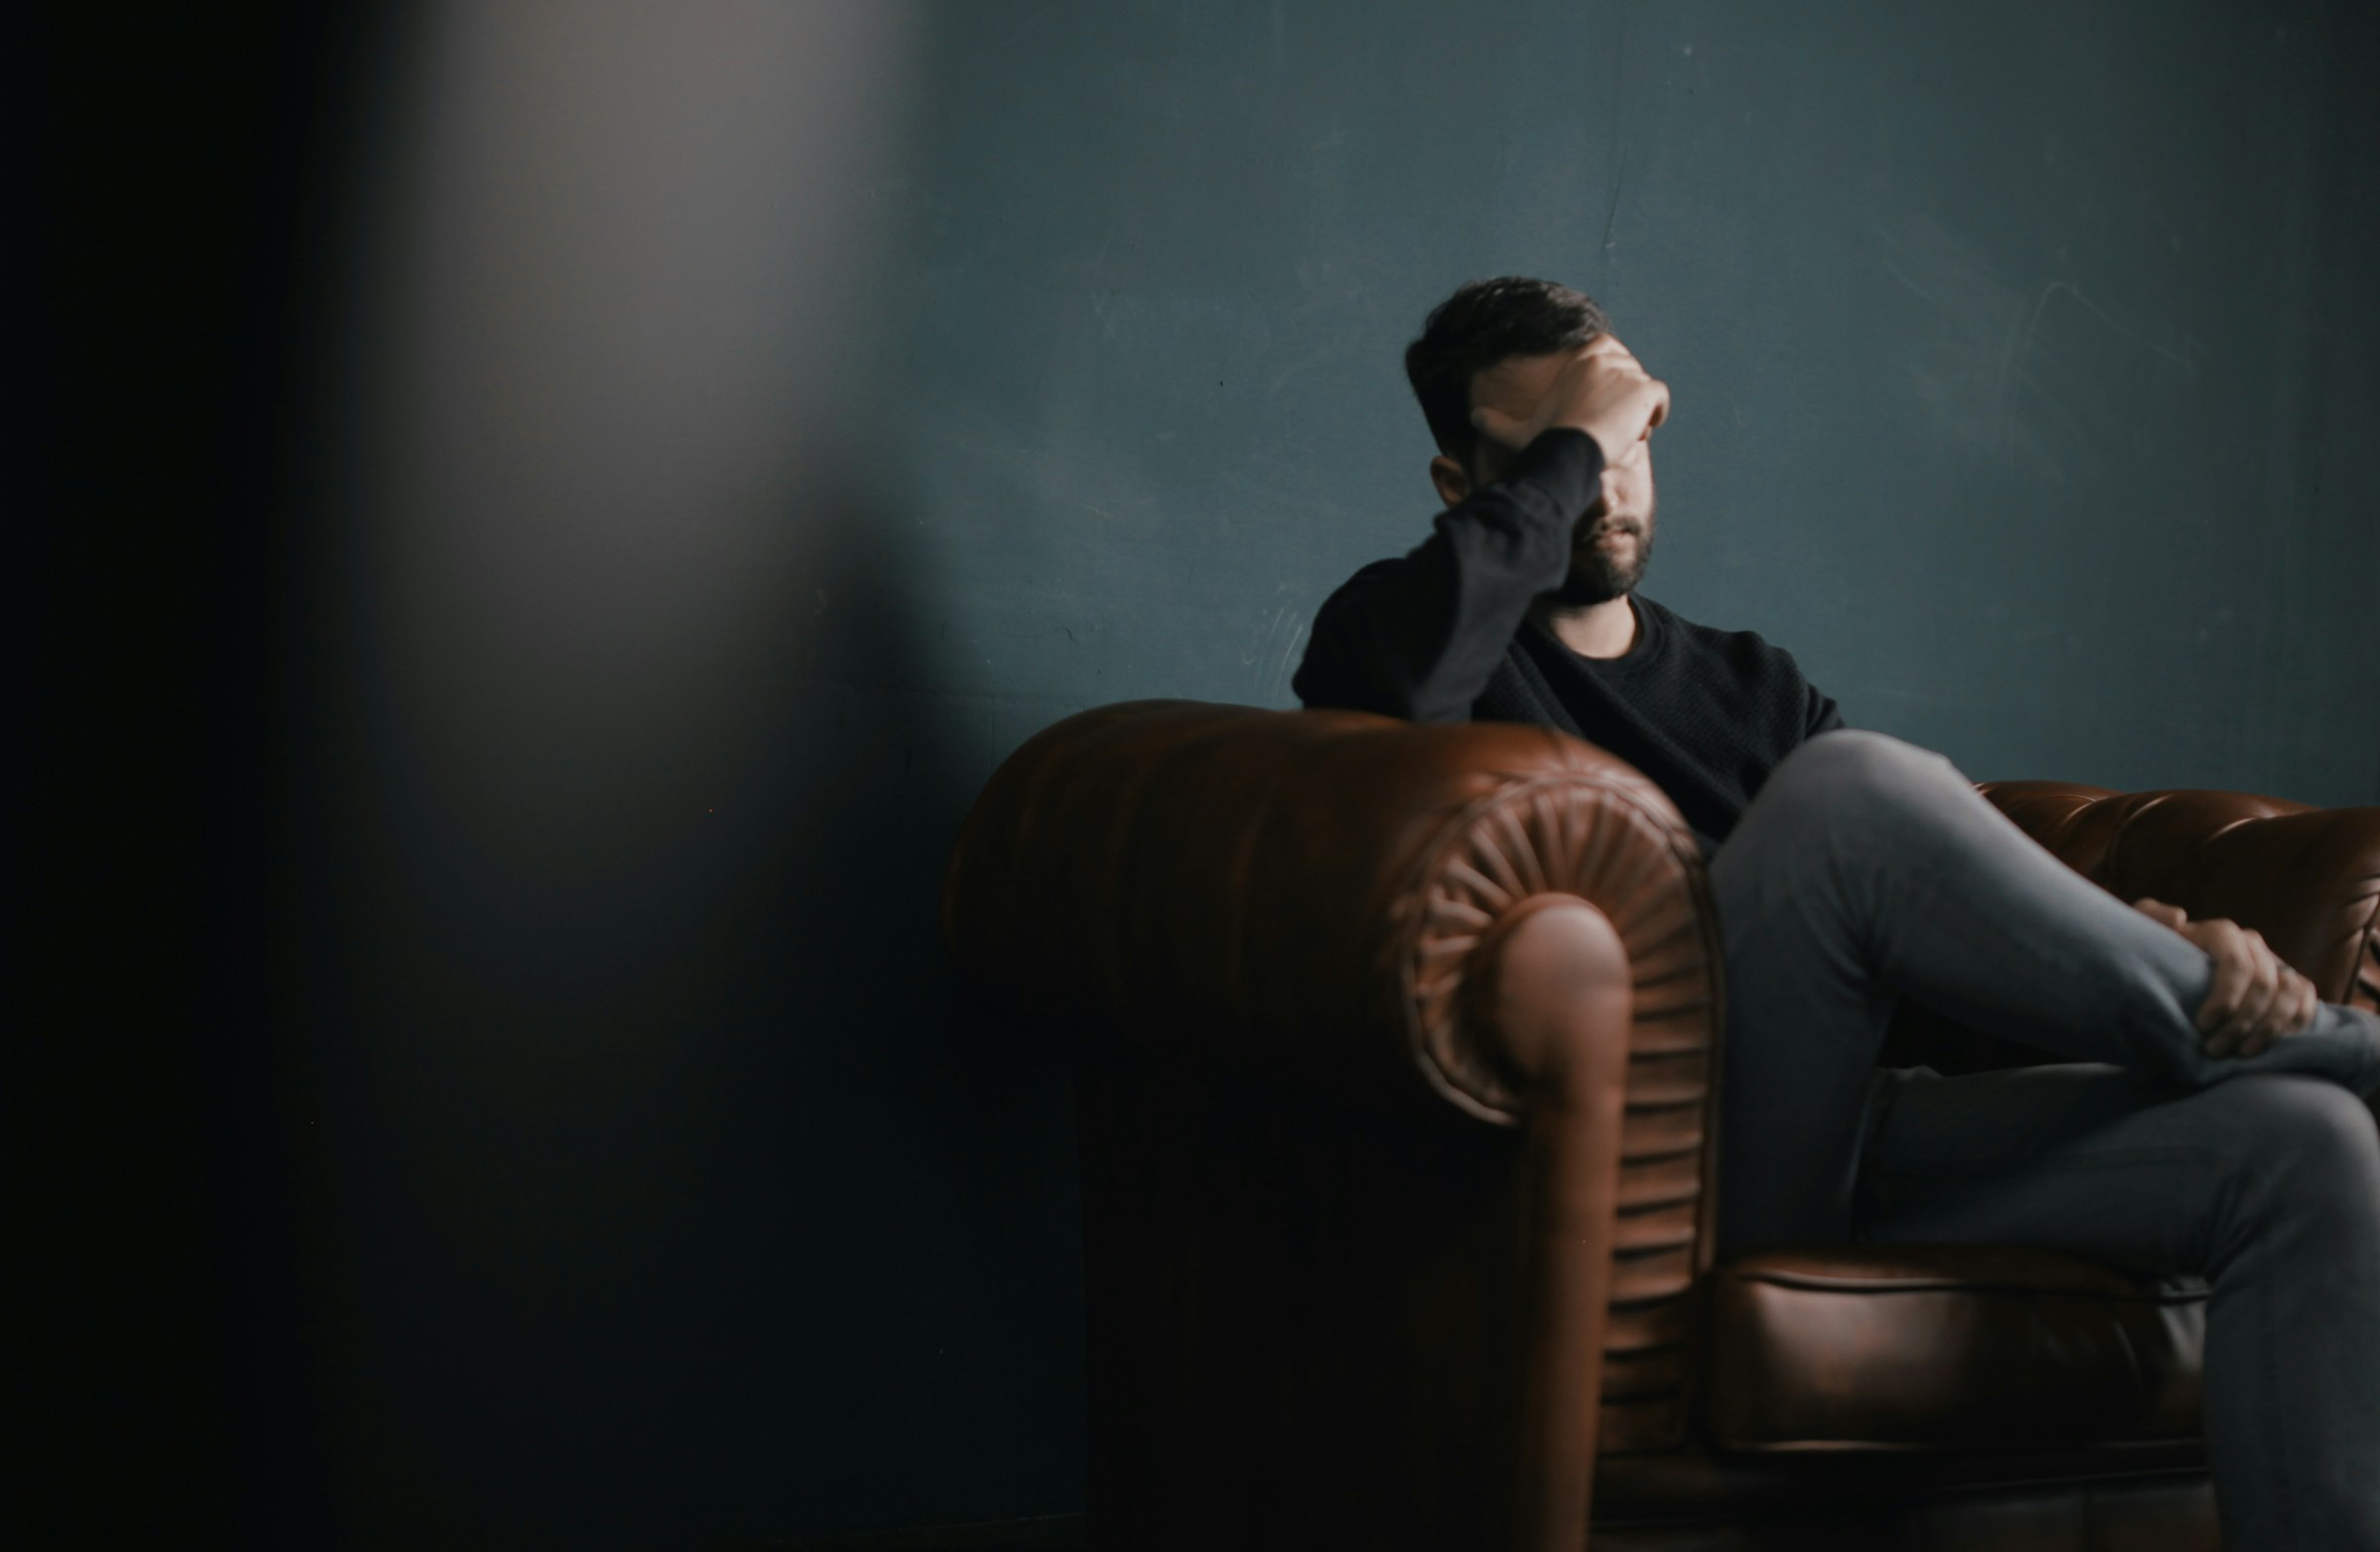 A man sitting on a couch | Source: Unsplash